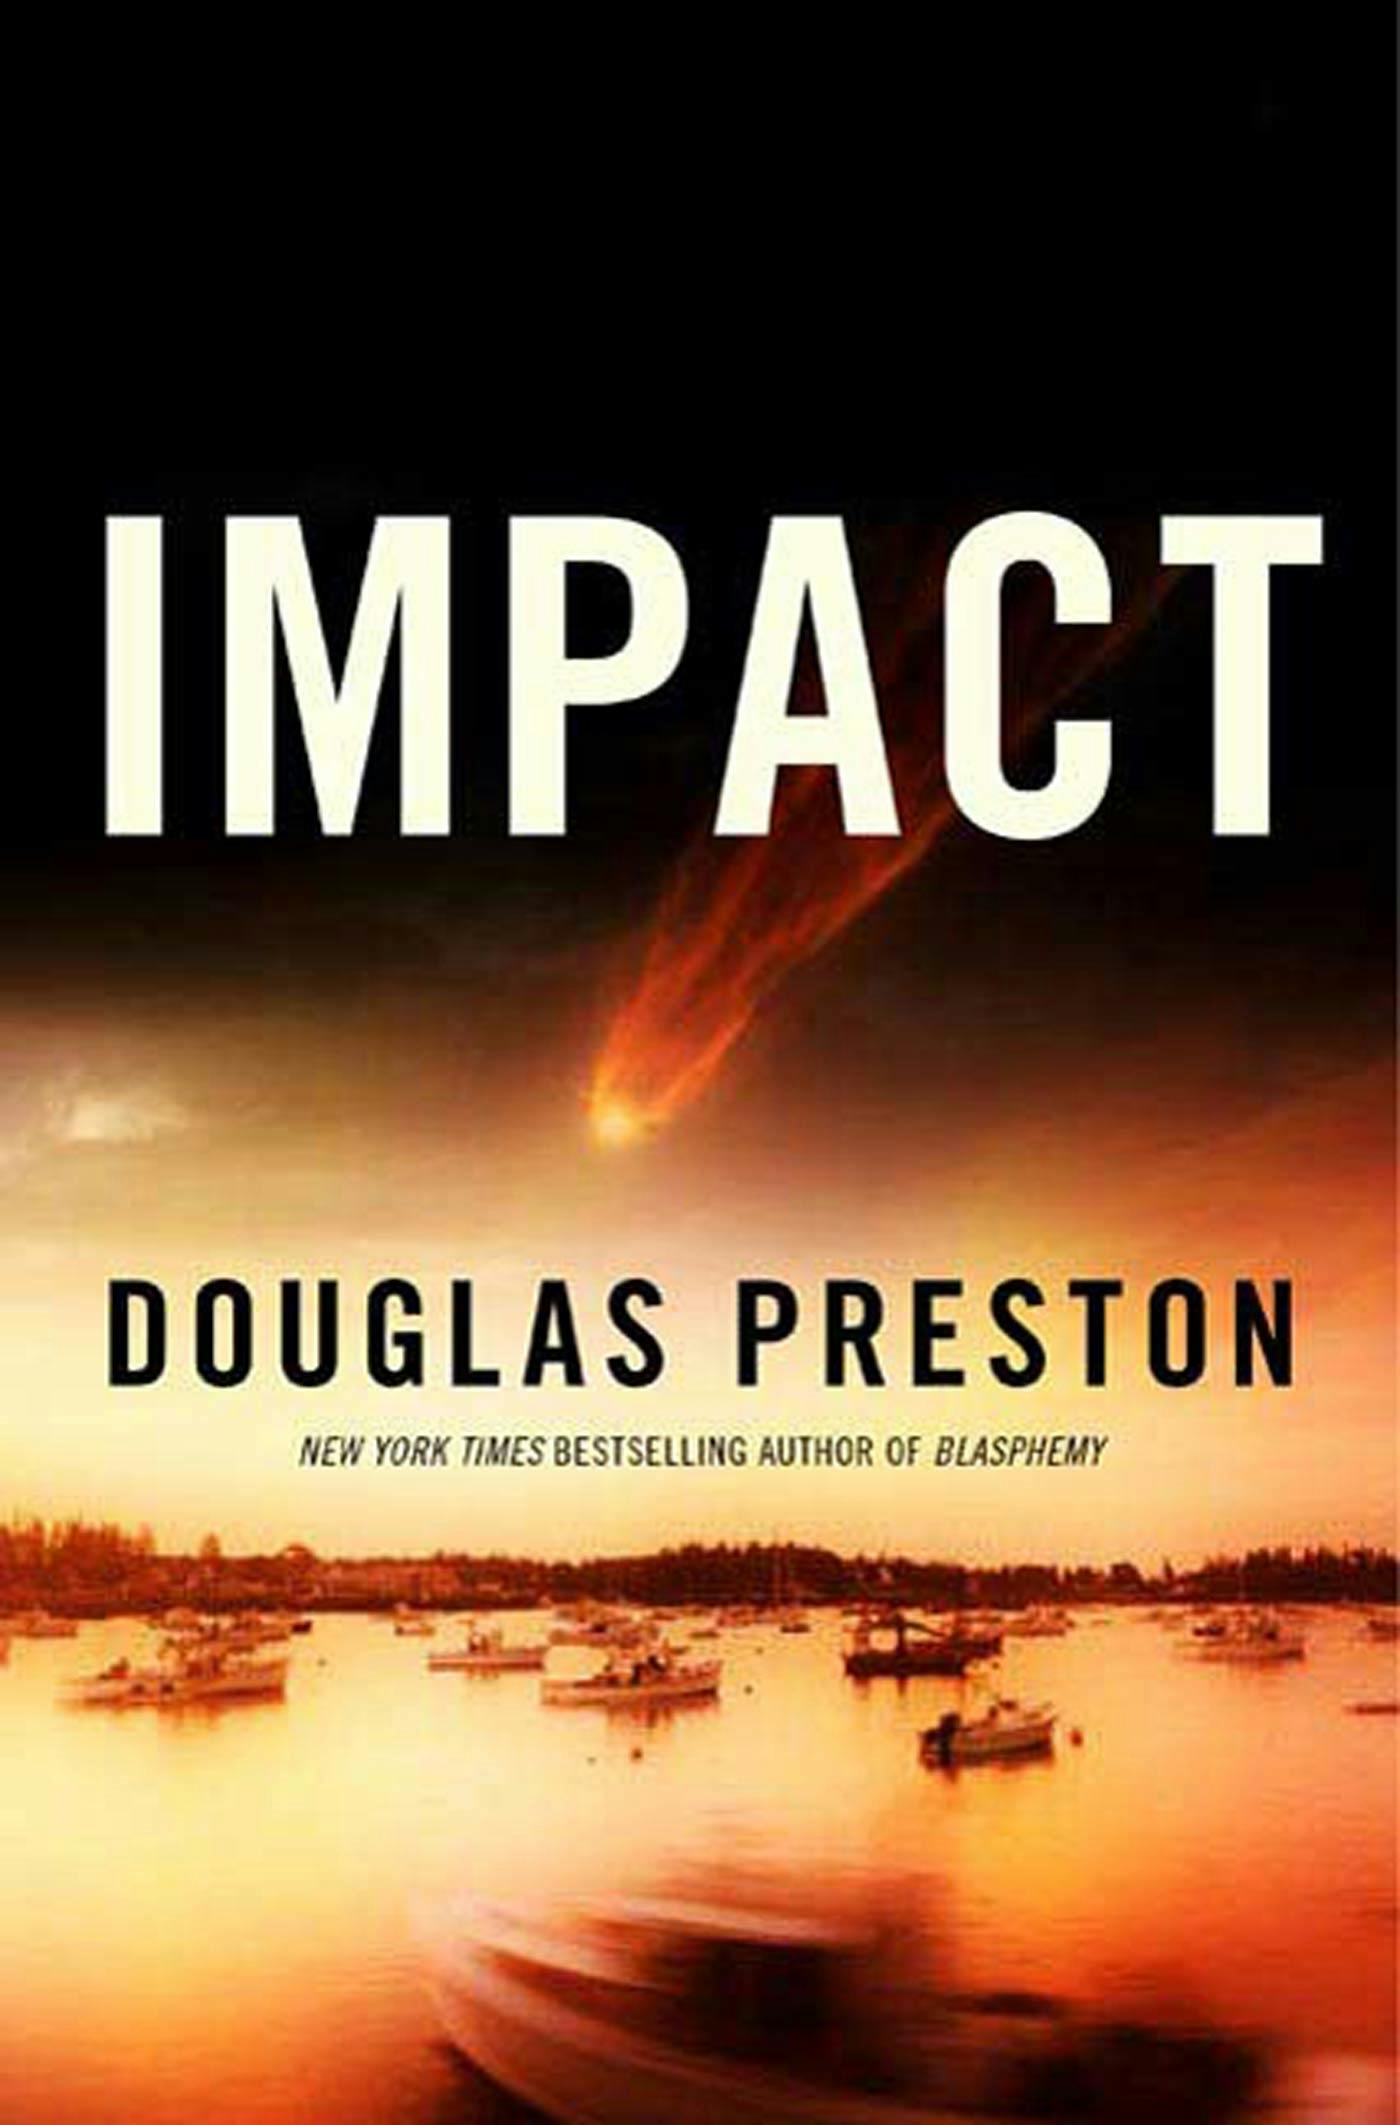 Cover for the book titled as: Impact